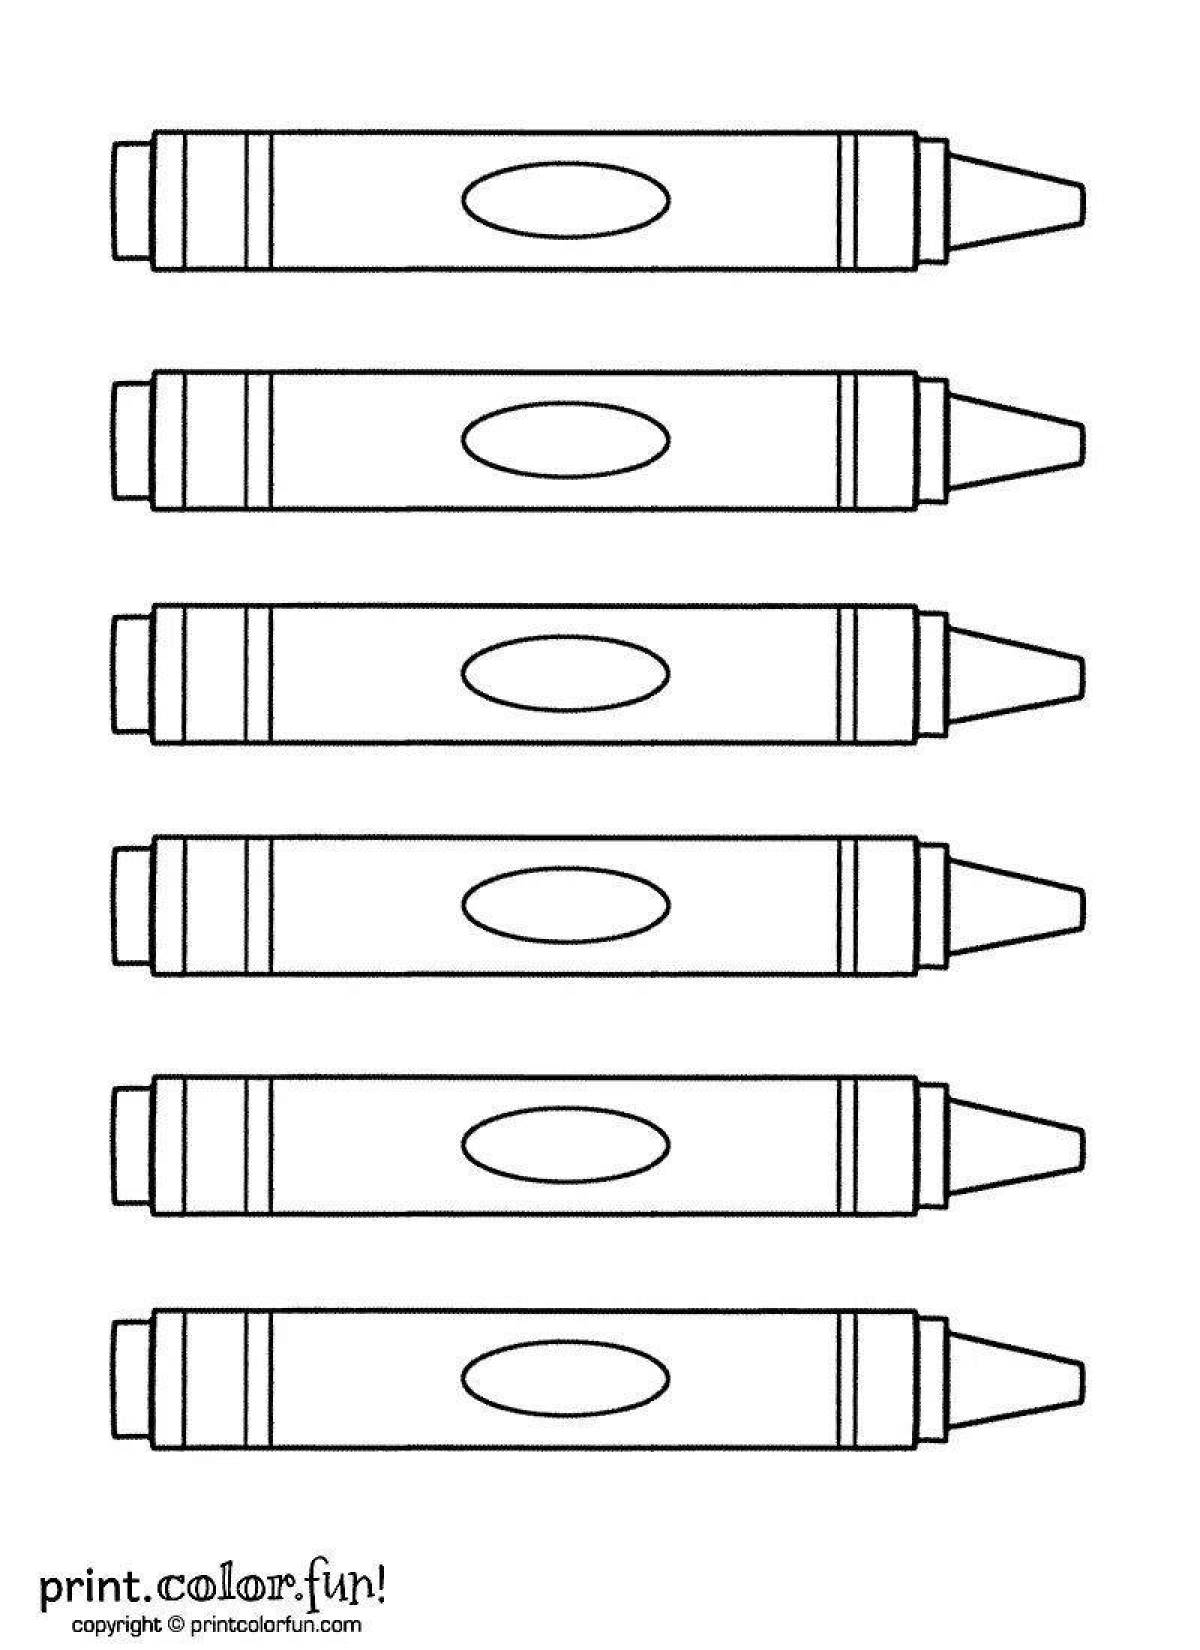 Dimed coloring page markers